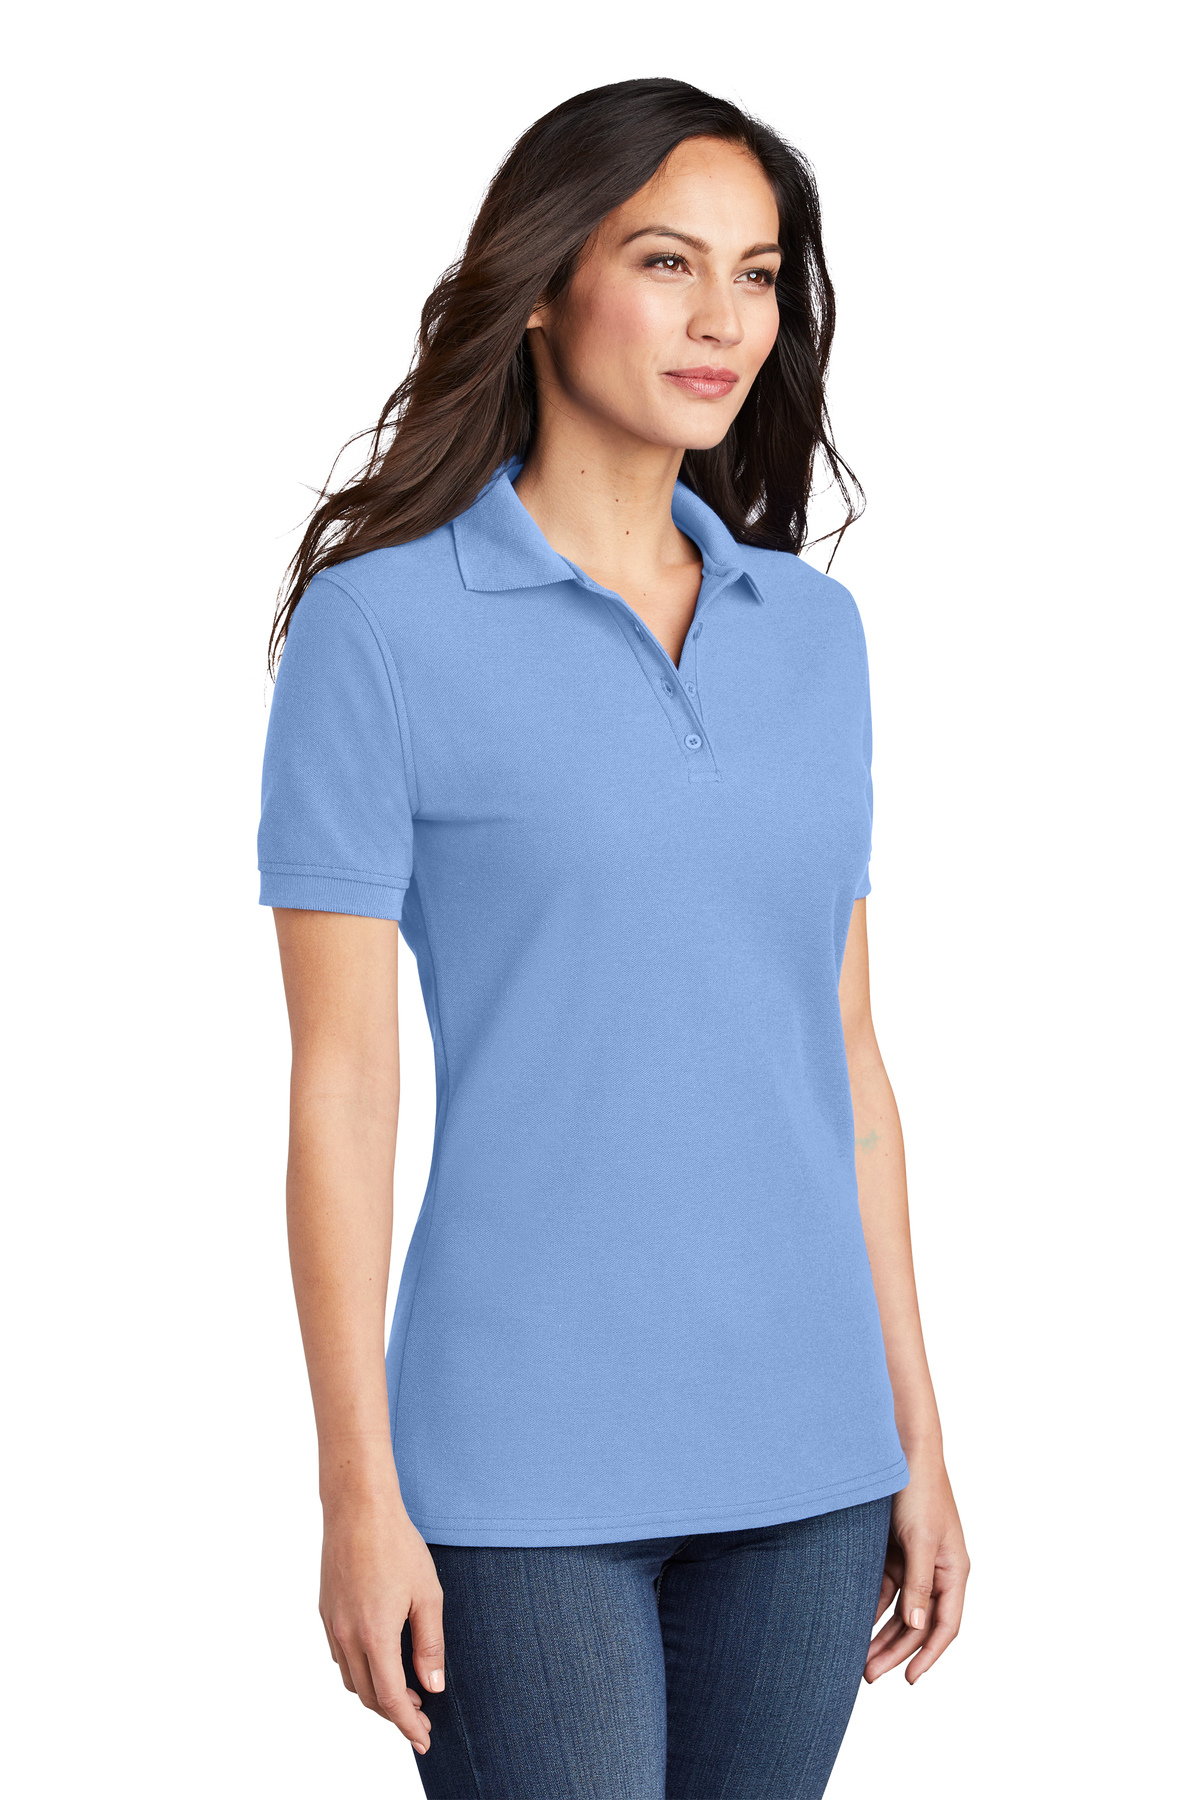 Port & Company Ladies Core Blend Pique Polo | Product | Company Casuals